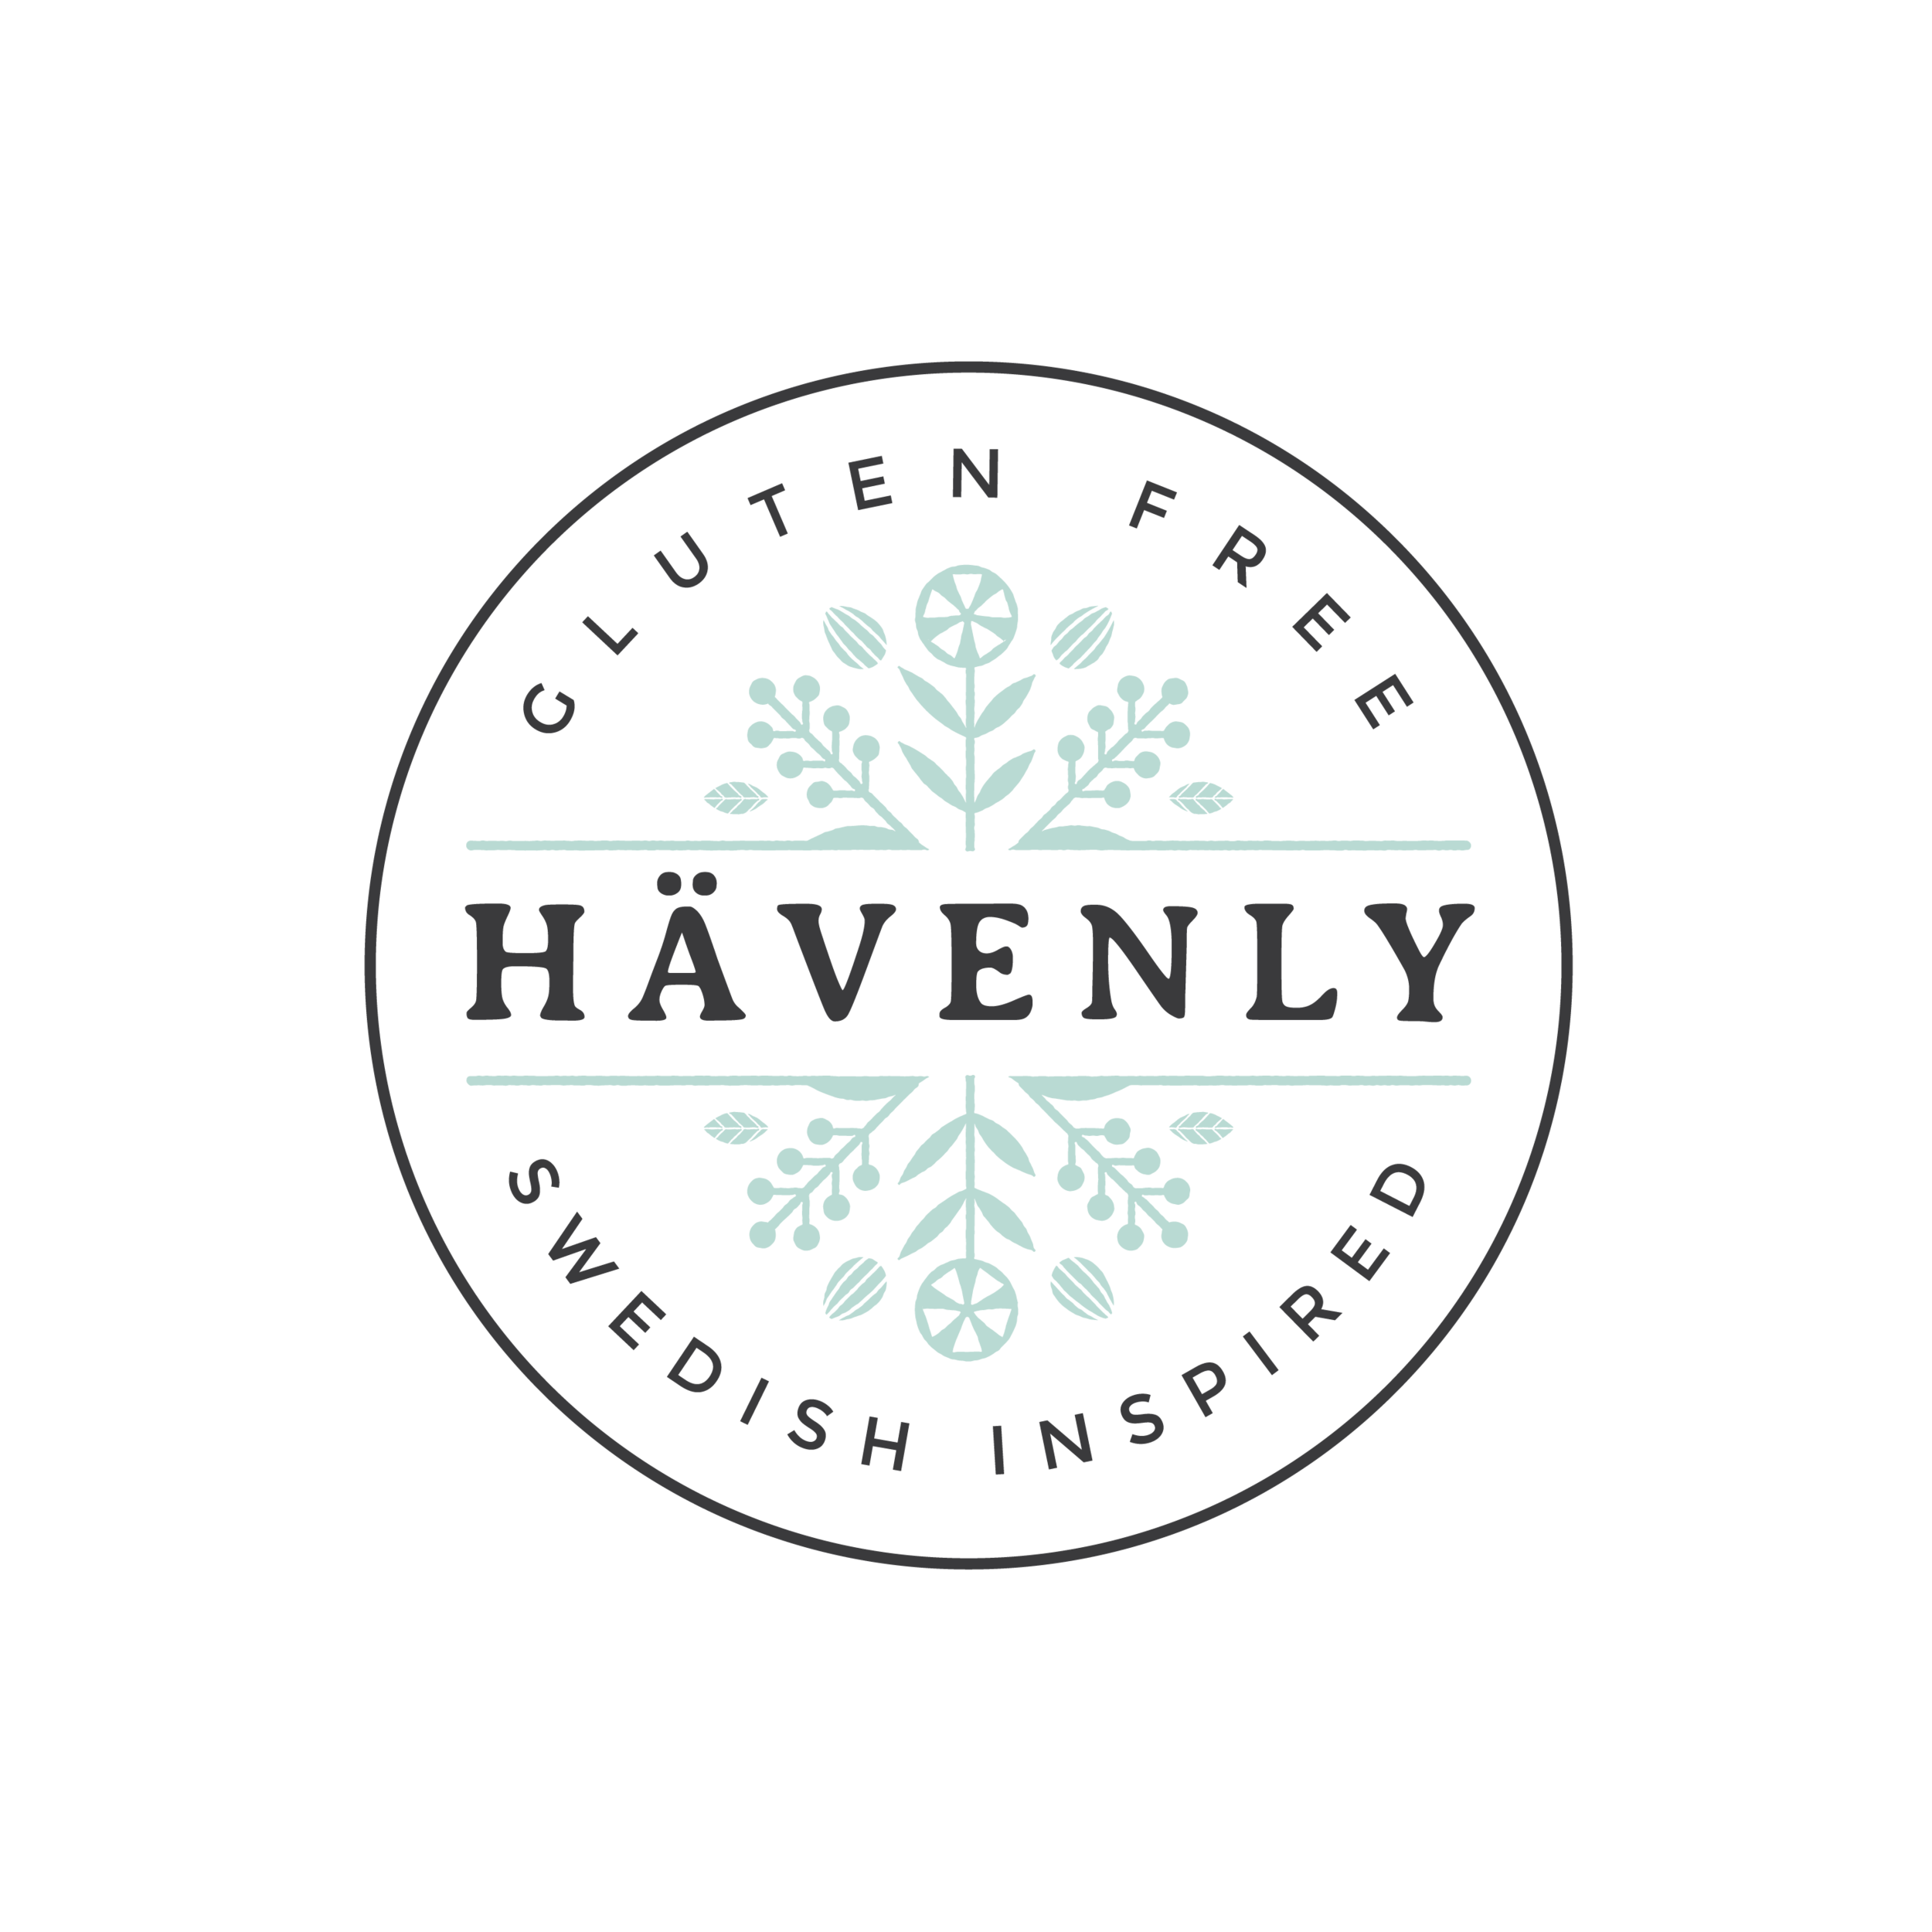 Havenly Baked Goods